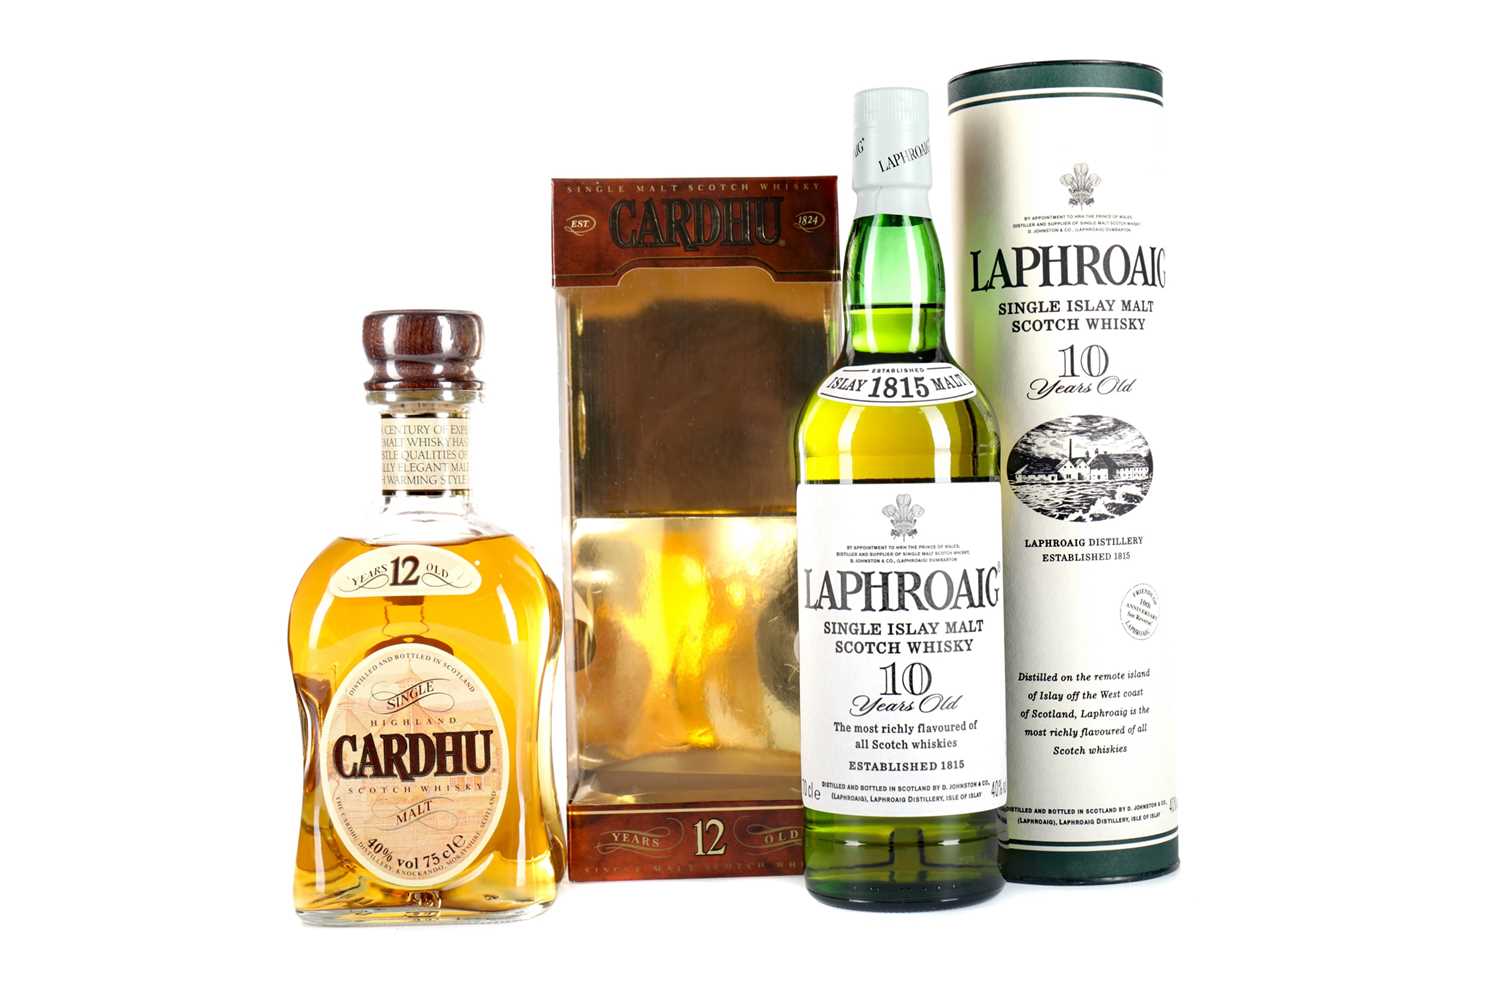 Lot 60 - LAPHROAIG 10 YEARS OLD AND CARDHU 12 YEARS OLD